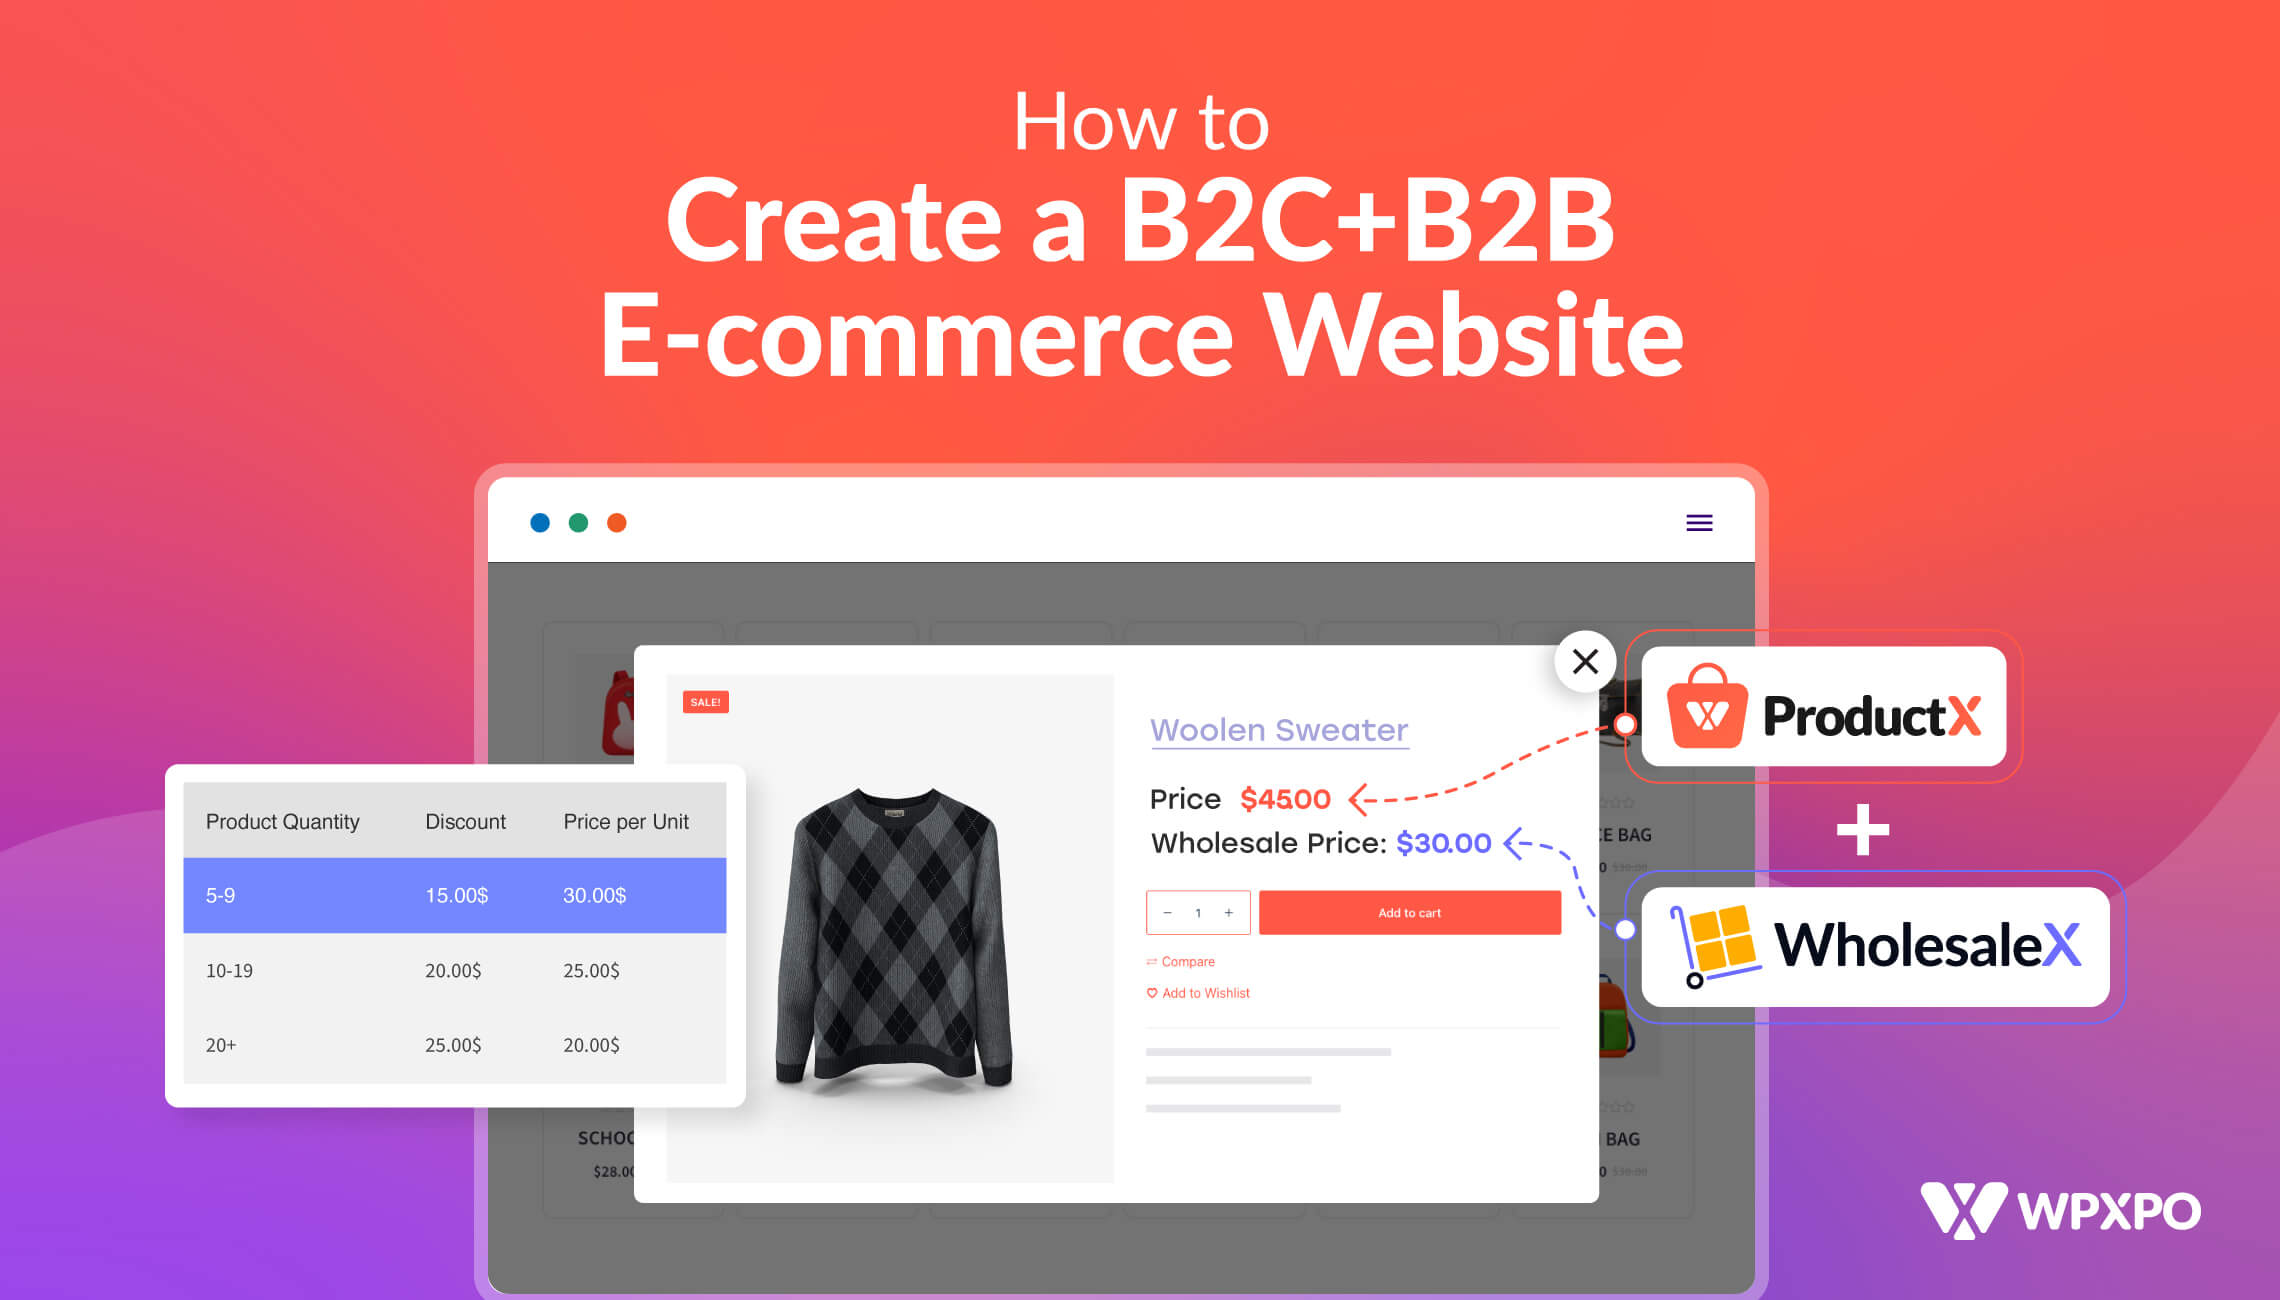 How to Create a B2C+B2B eCommerce Website [using ProductX and WholesaleX]